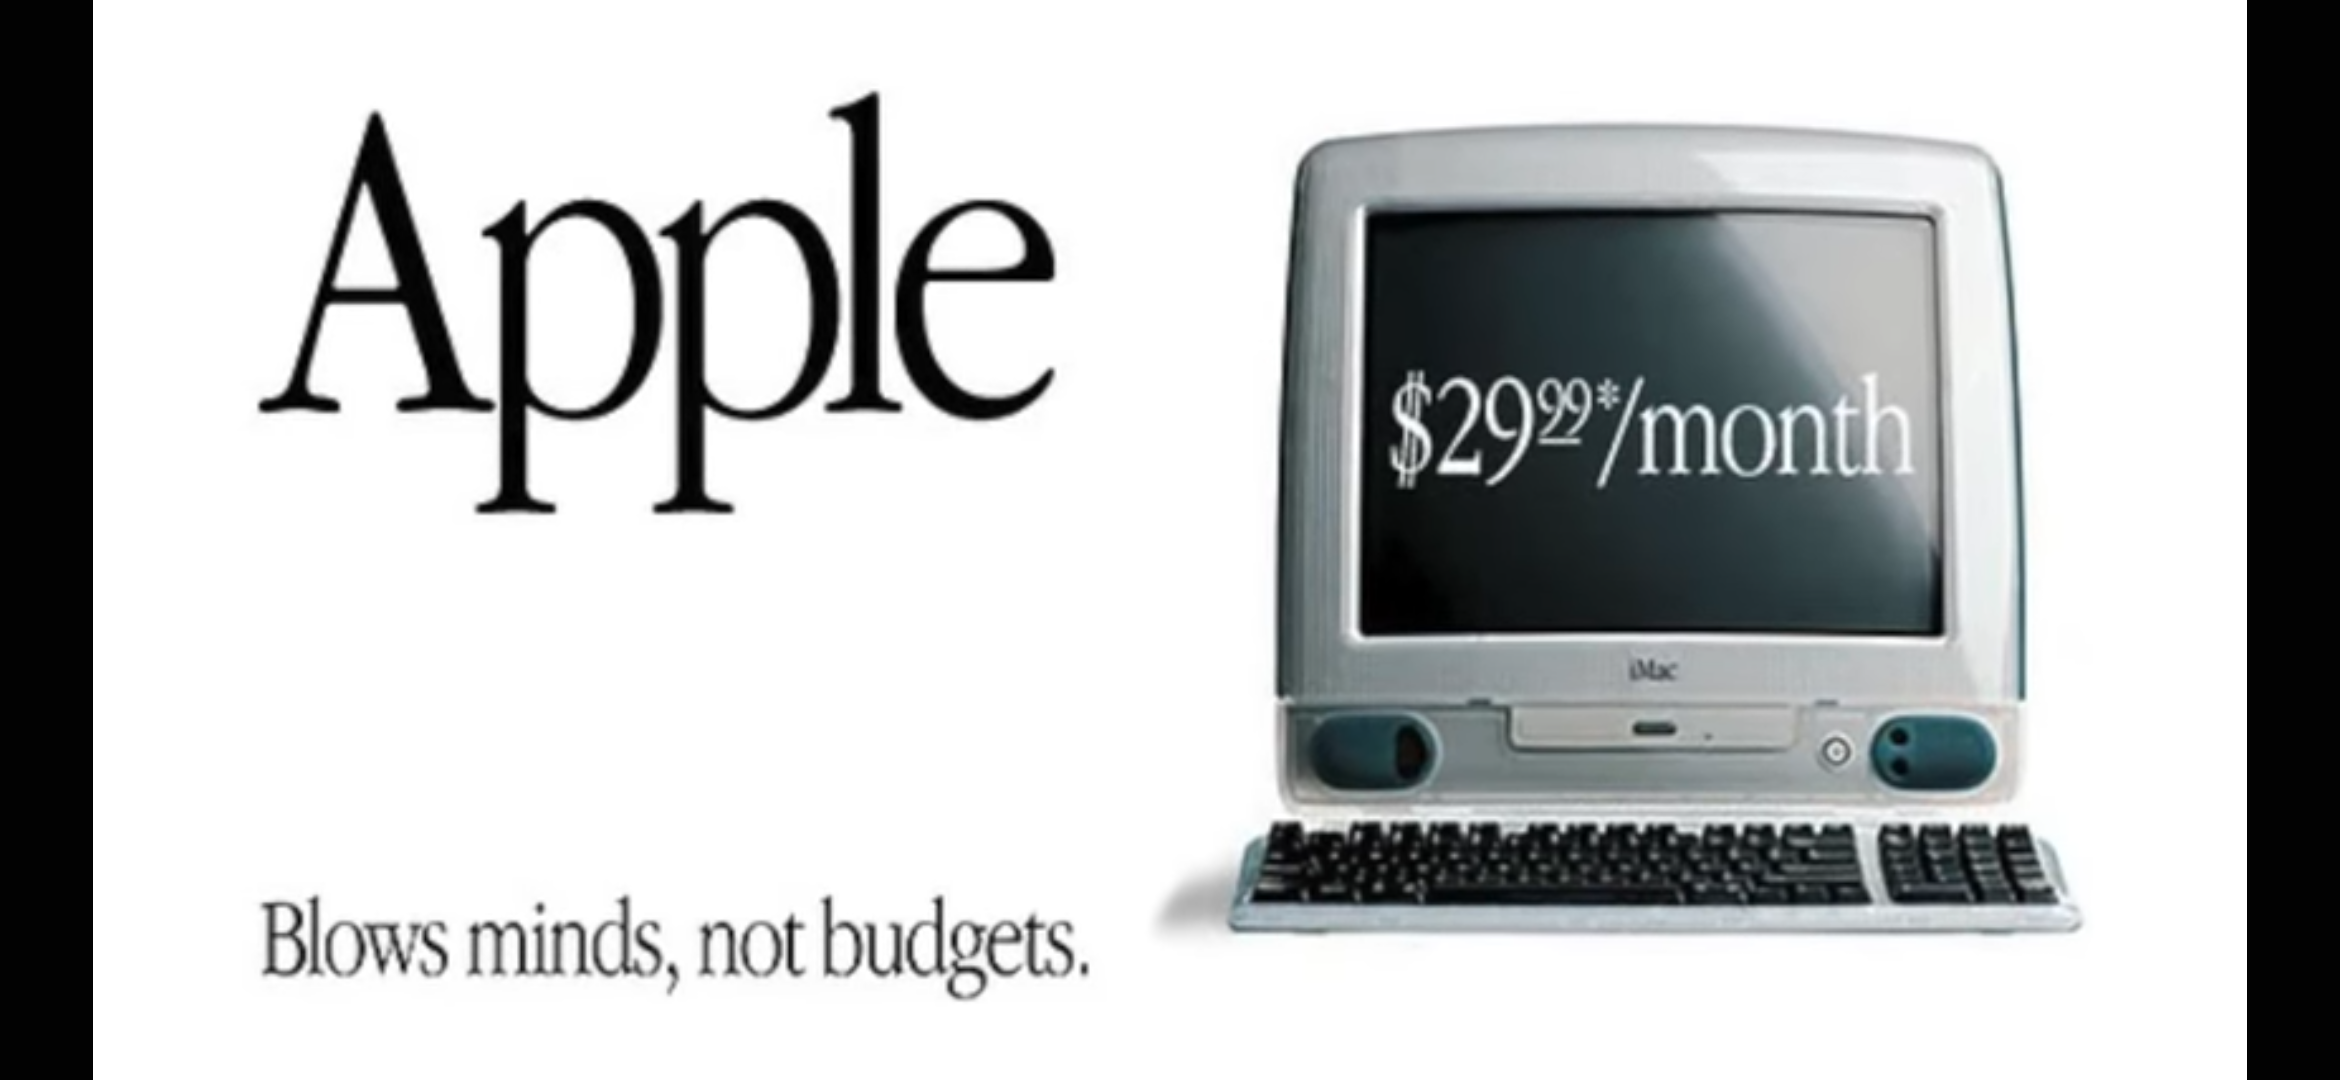 apple text - Apple $292month Eee Blows minds, not budgets.